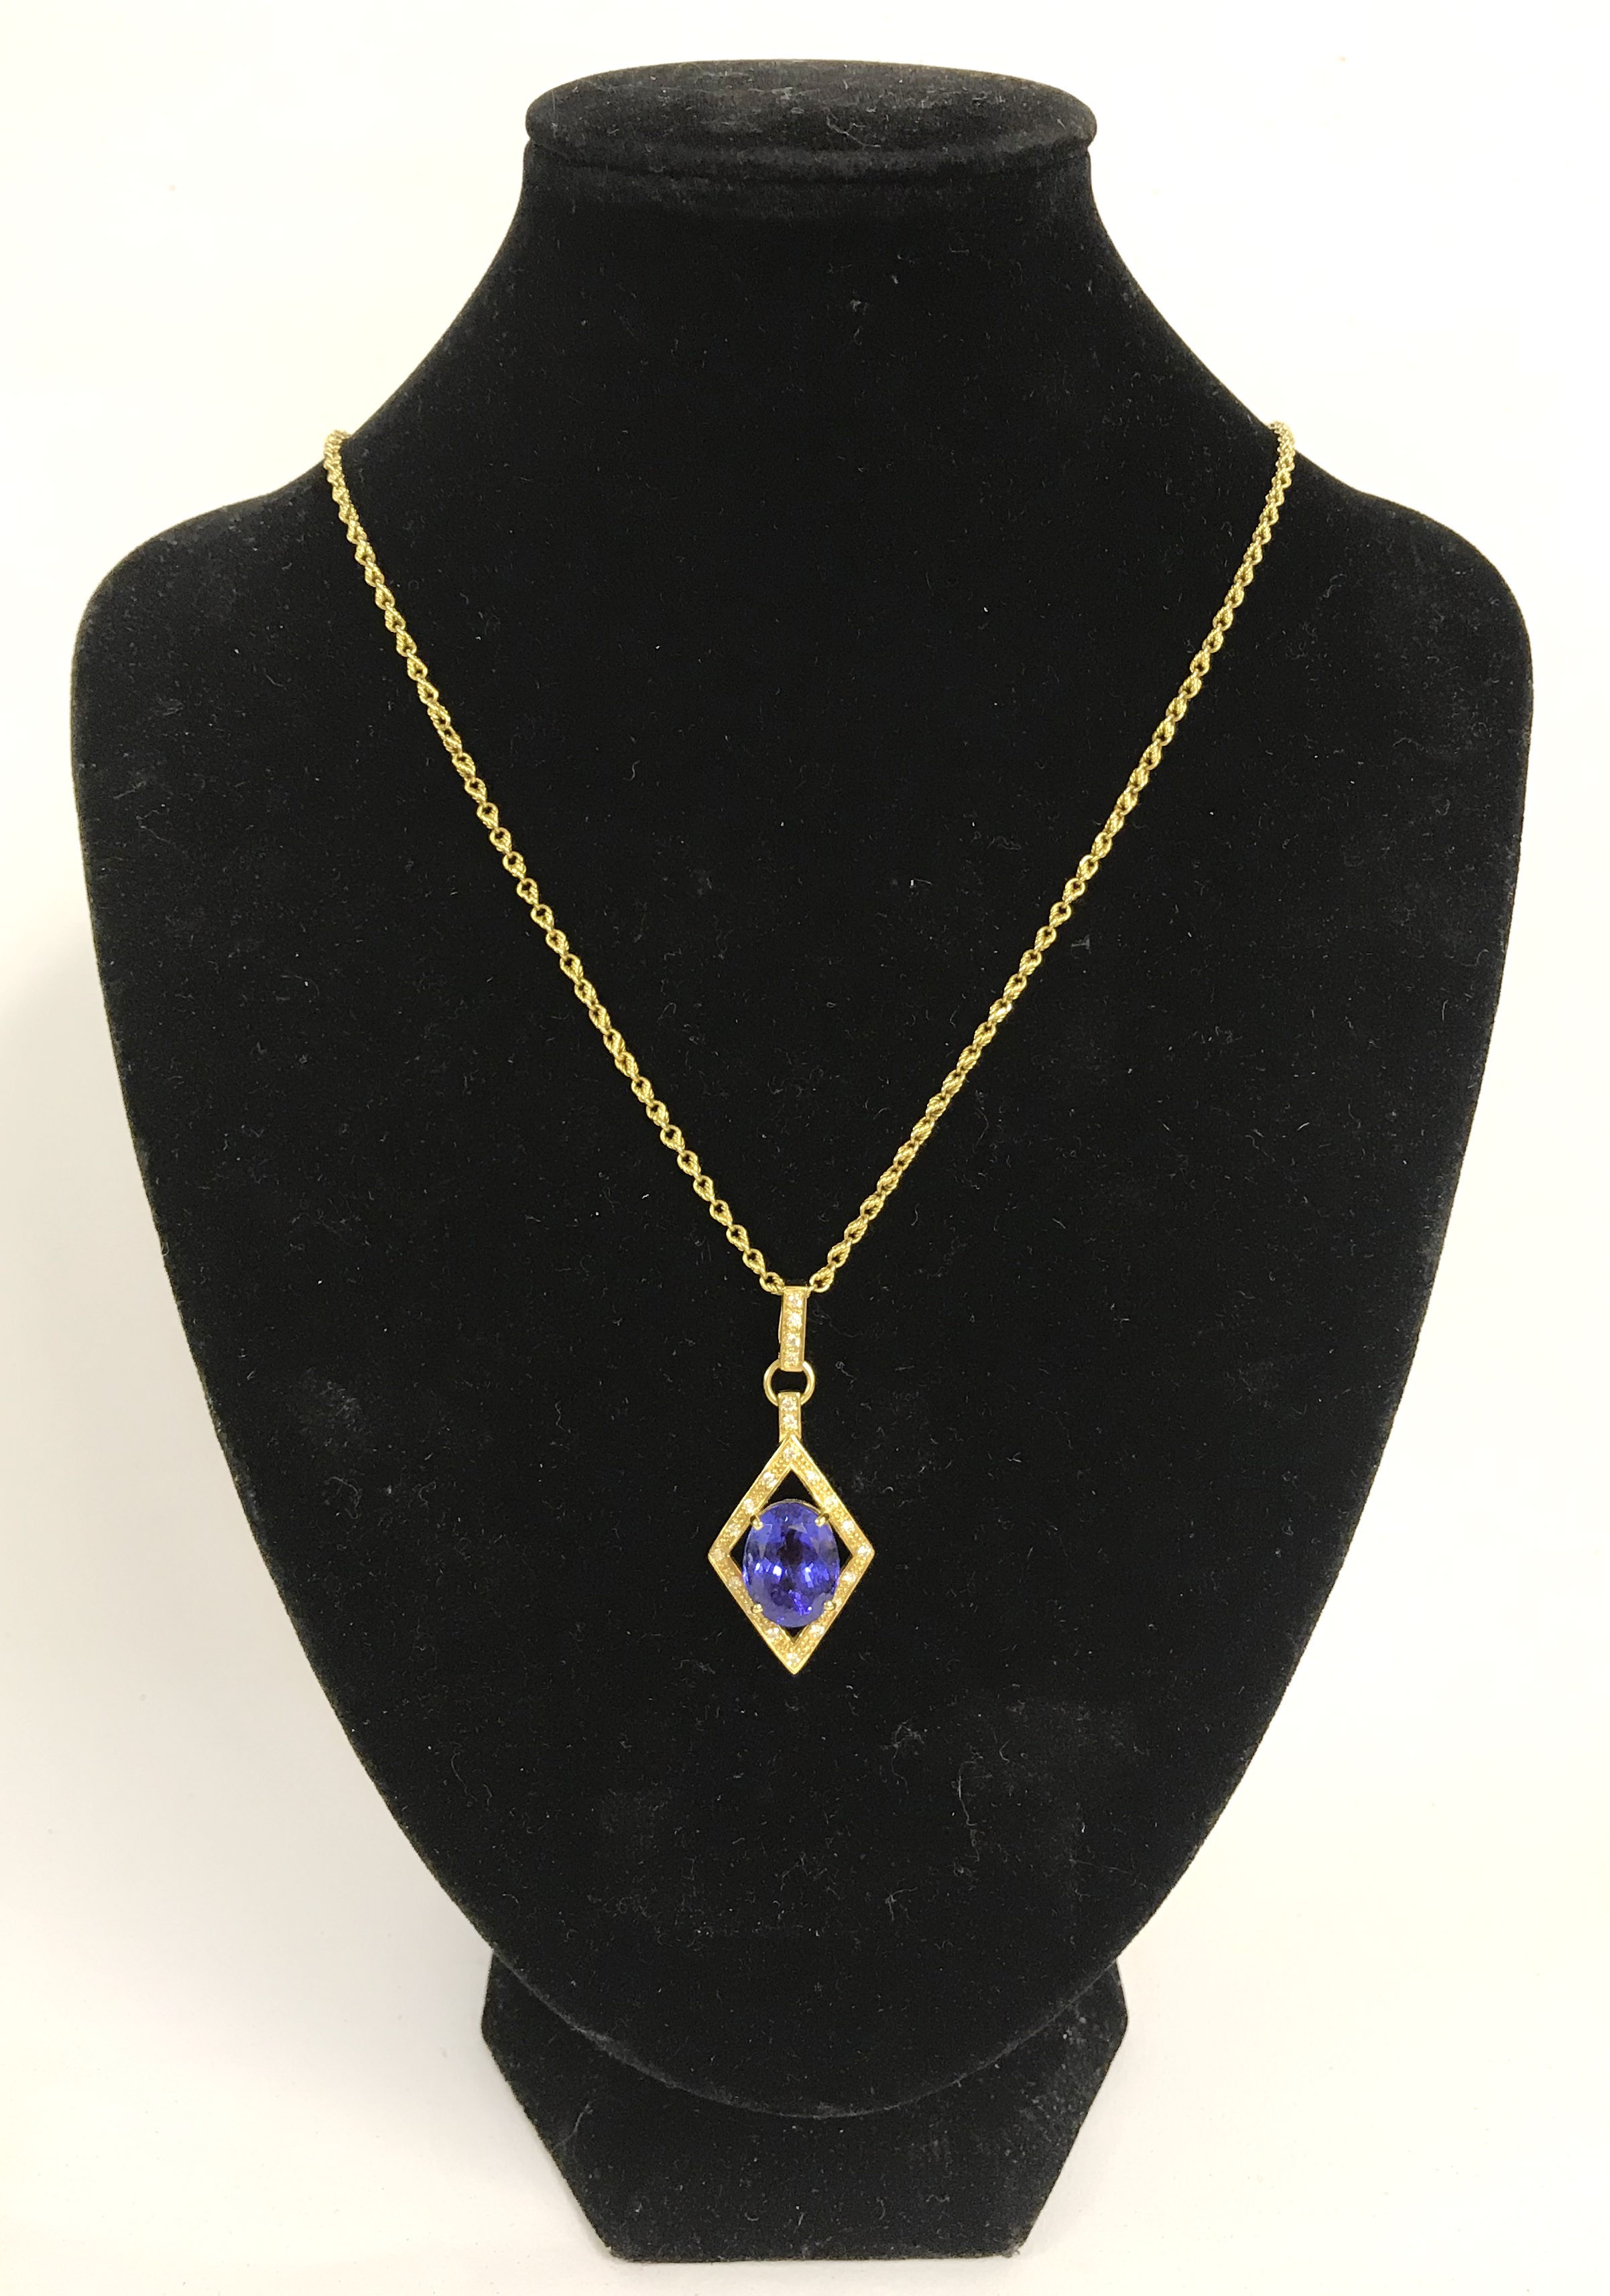 18CT GOLD DIAMOND PENDANT WITH 18CT YELLOW GOLD CHAIN